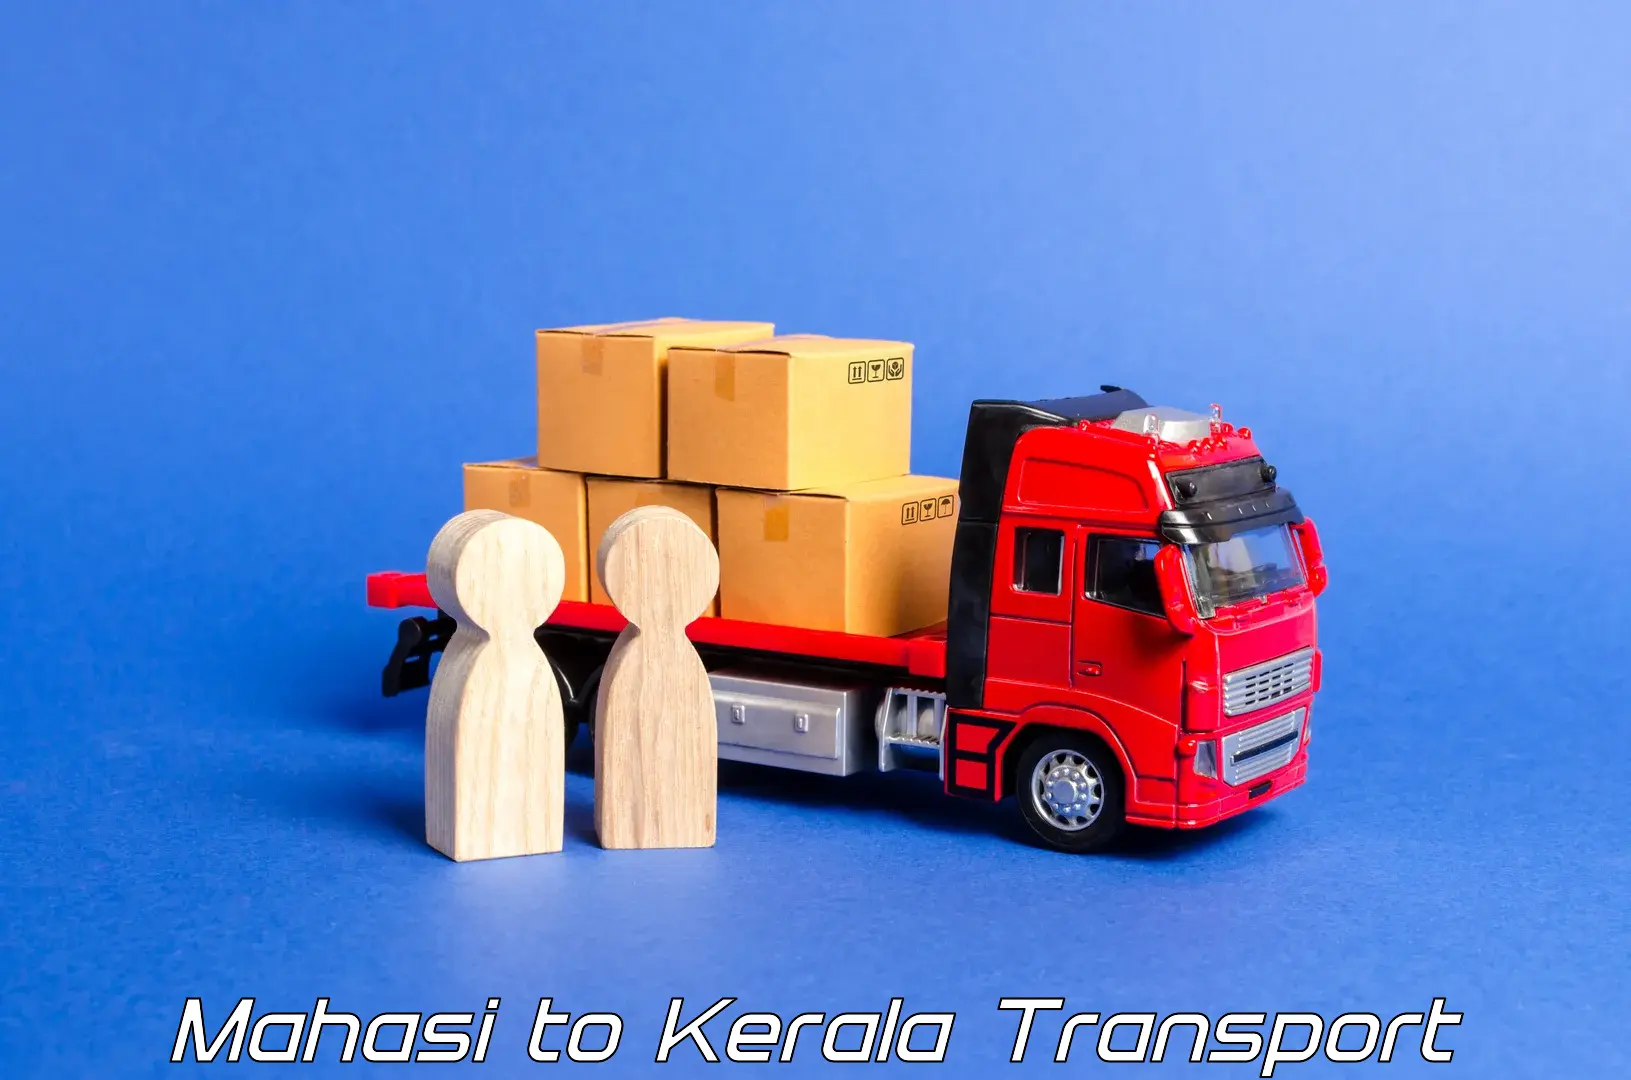 Vehicle transport services Mahasi to Thrissur